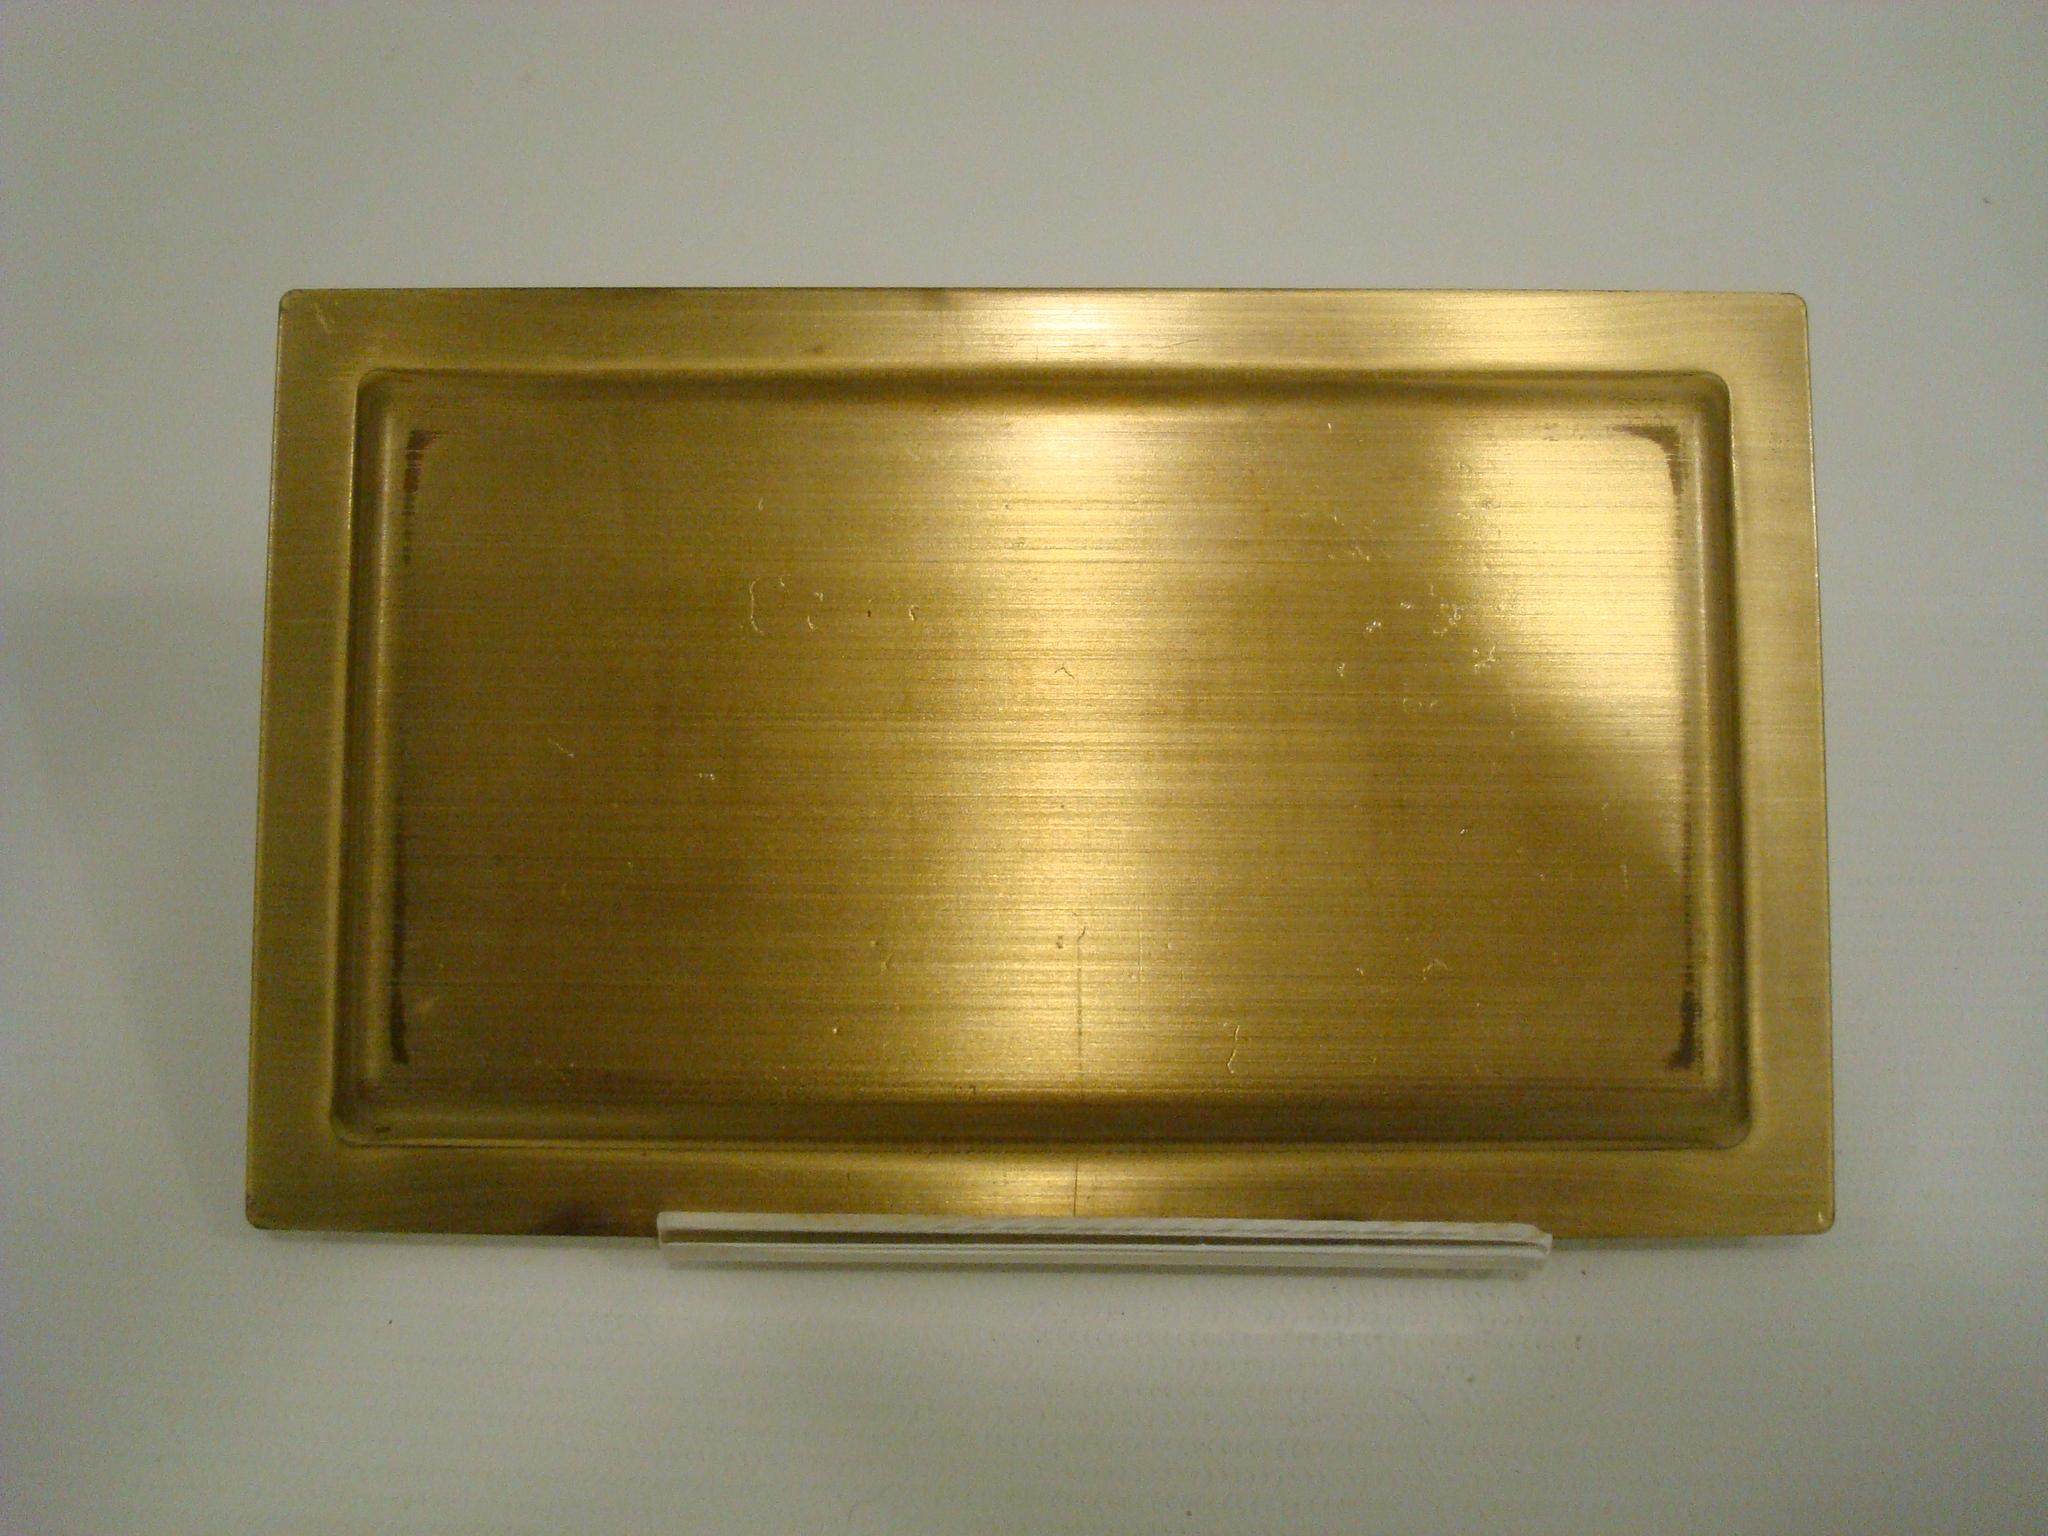 Gilt Louis Vuitton Jewelry Dish or a Personal Cards / Keys / Phone / Coins Plate For Sale